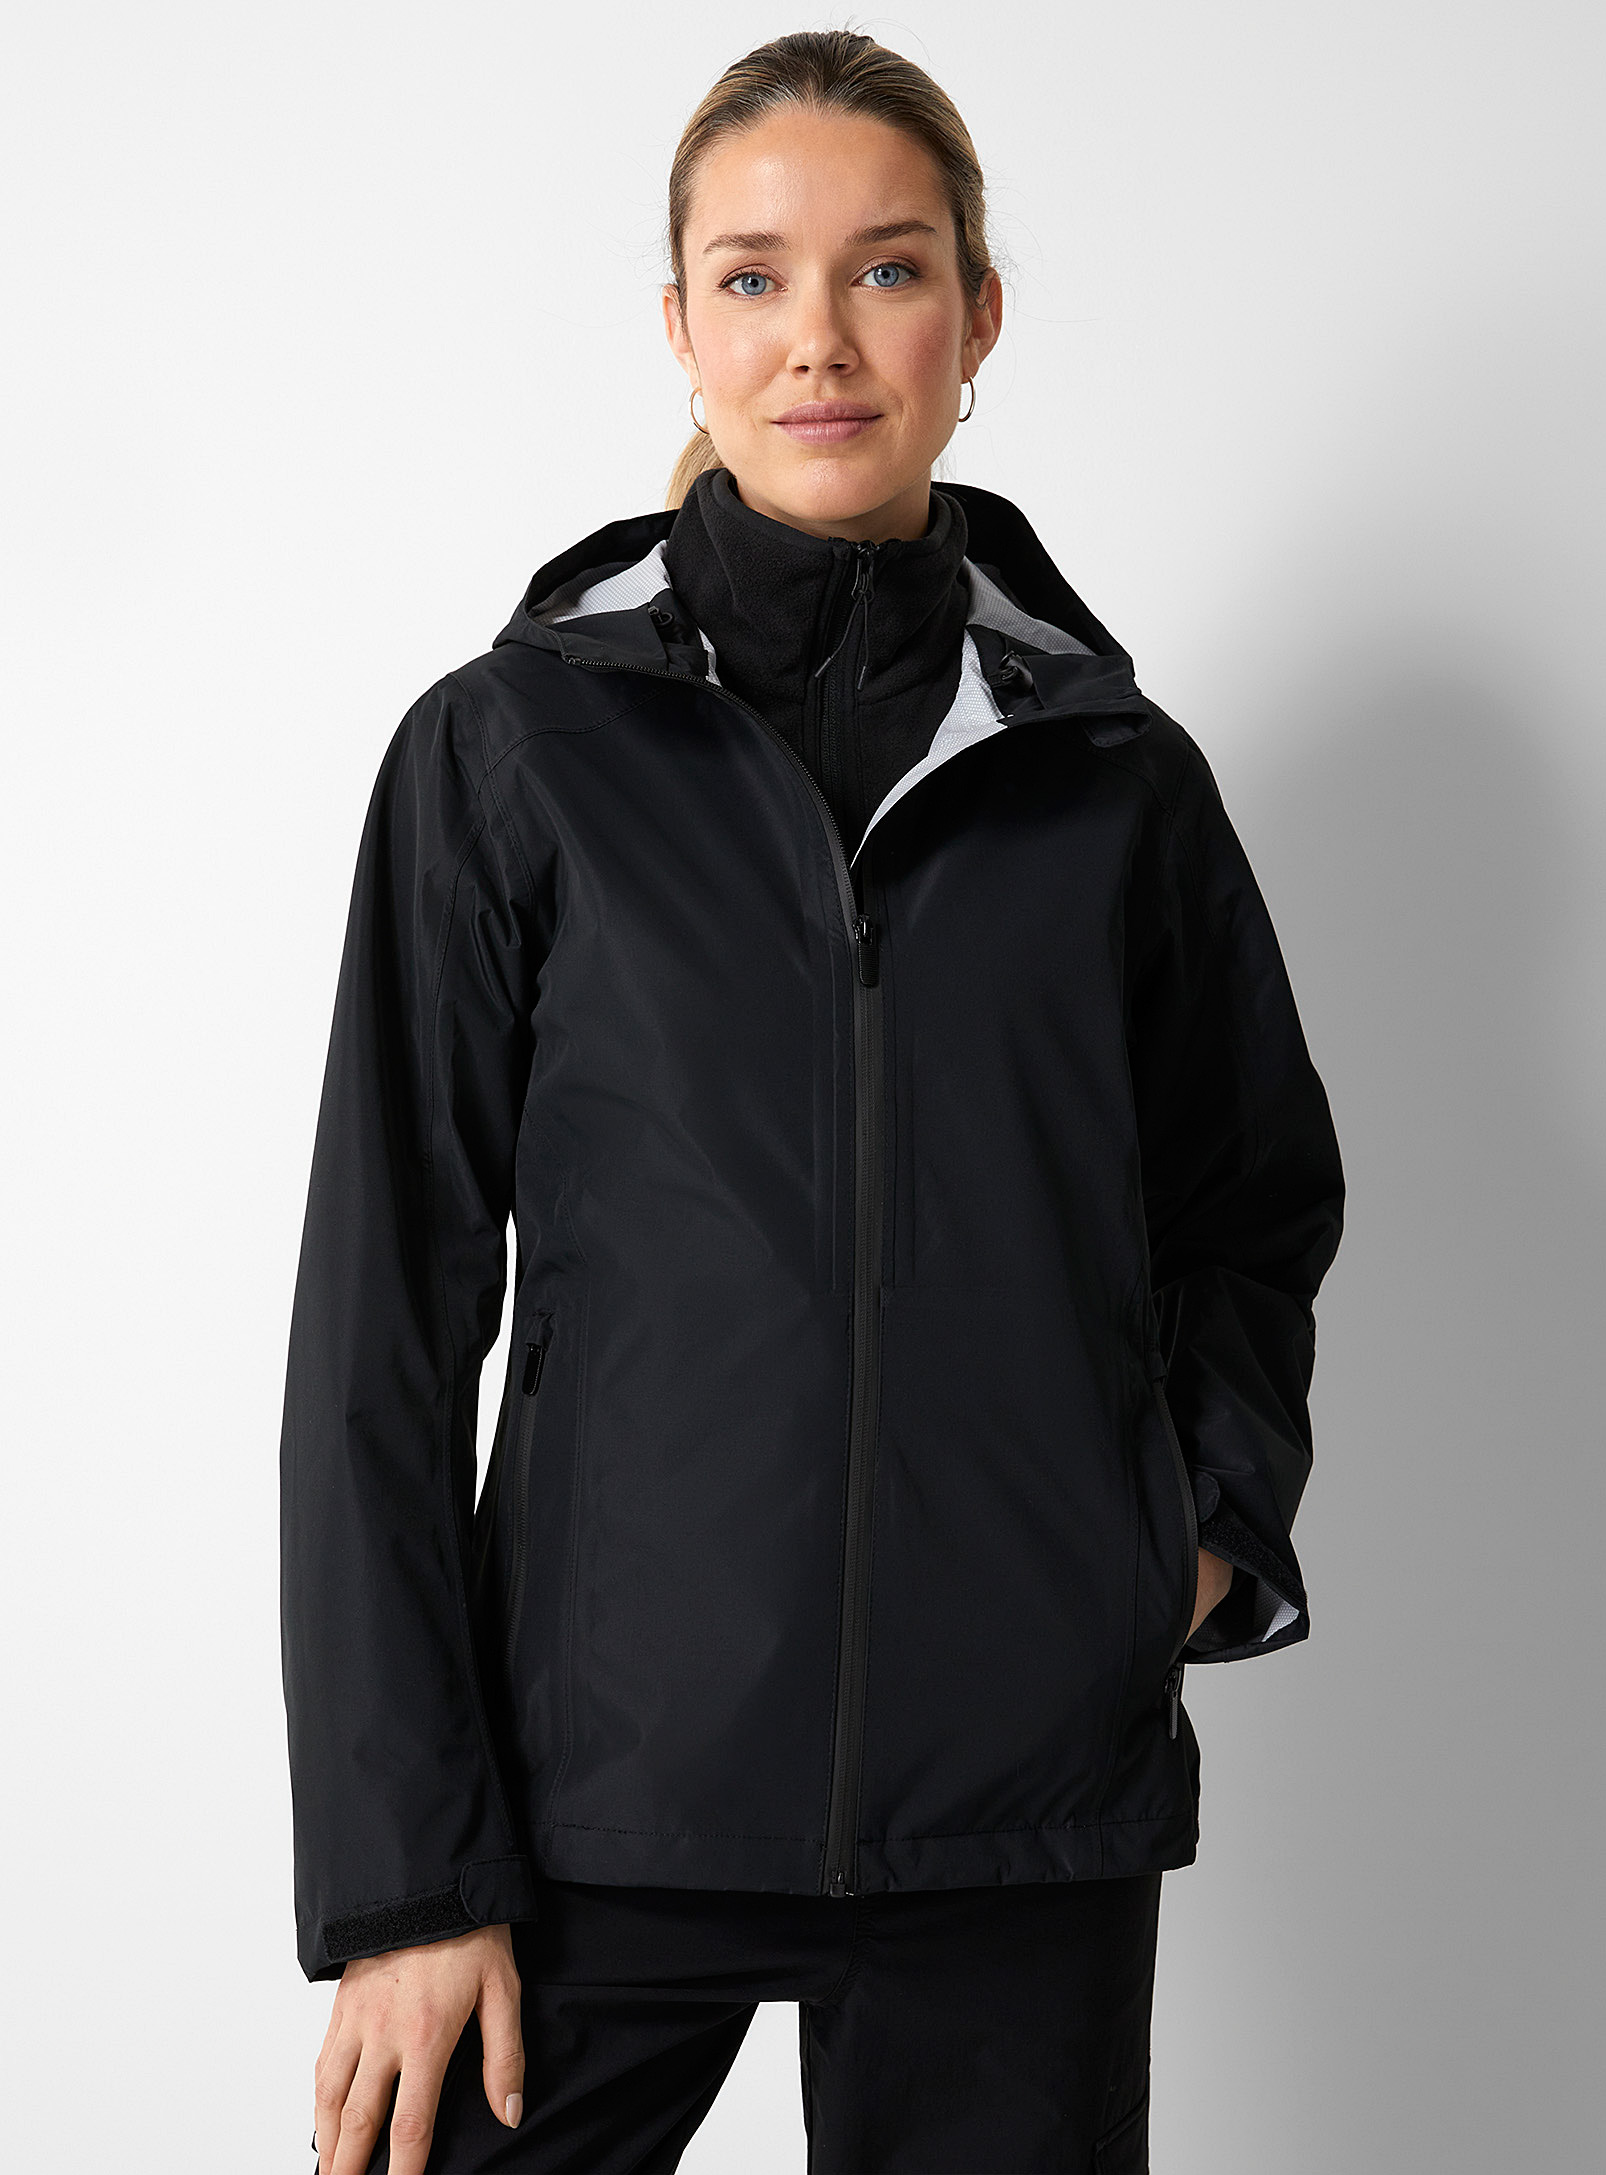 I.fiv5 Hooded Waterproof And Breathable Shell Jacket In Black